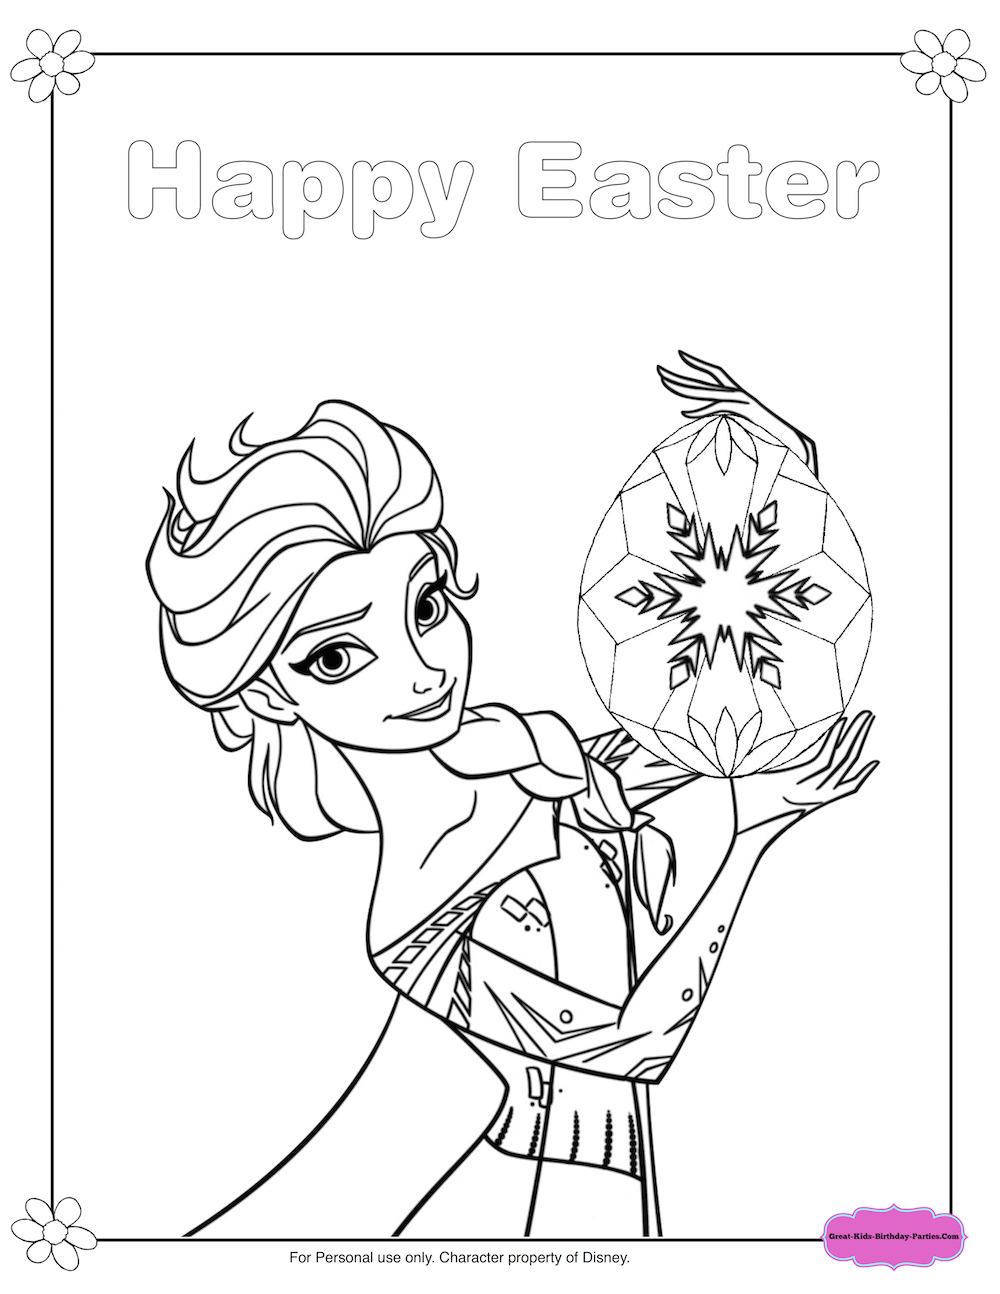 Frozen Easter Coloring Page